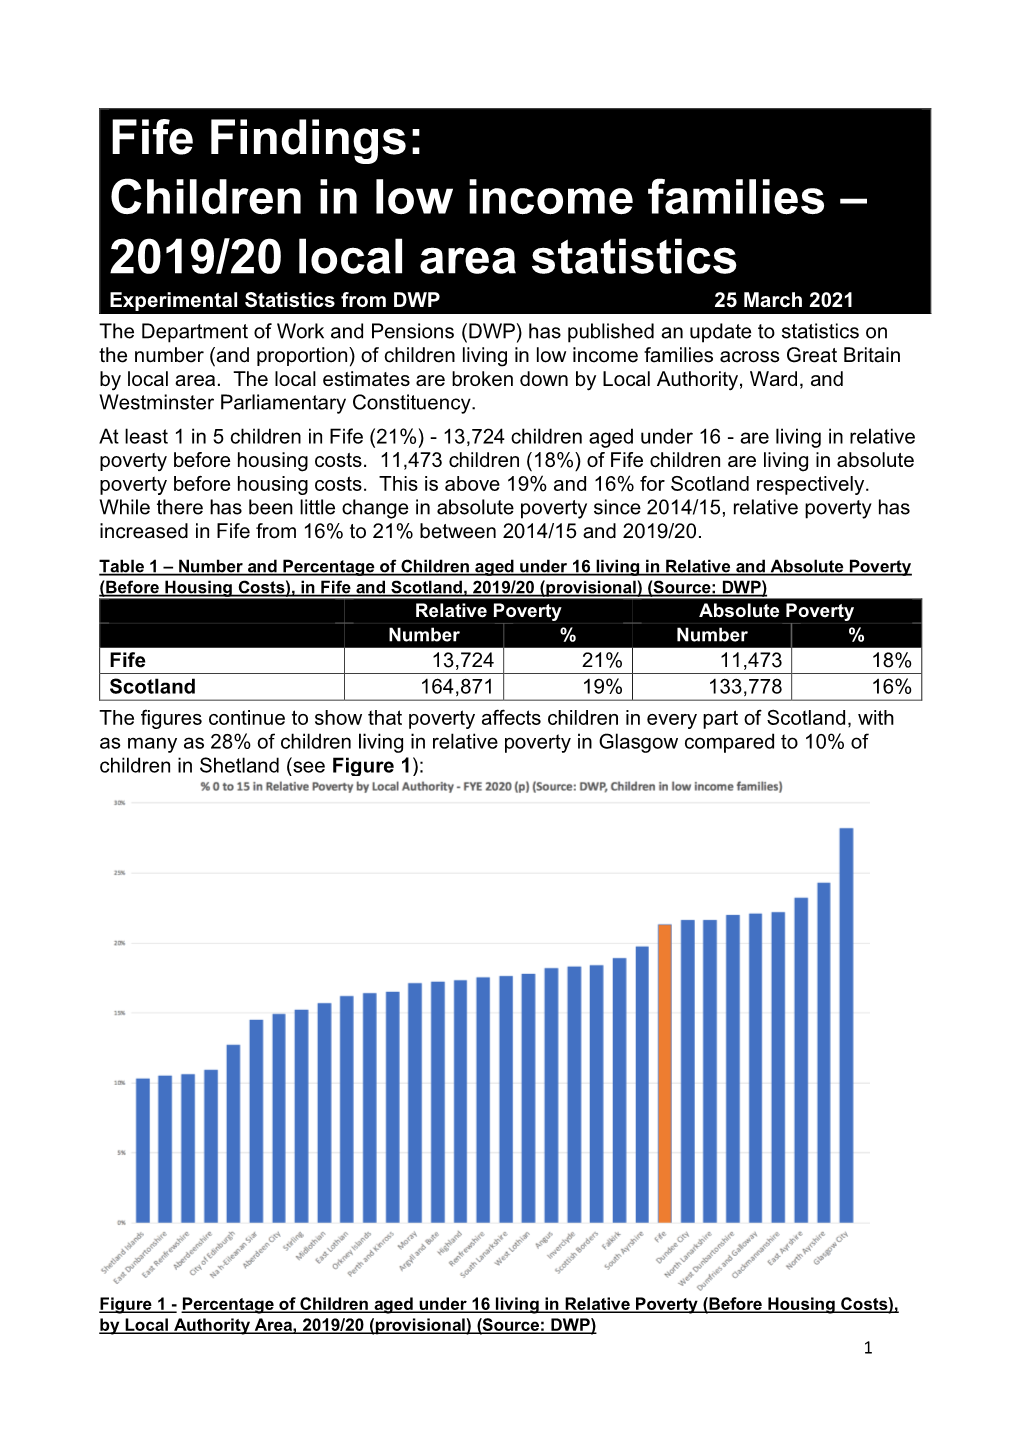 Fife Findings: Children in Low Income Families – 2019/20 Local Area Statistics